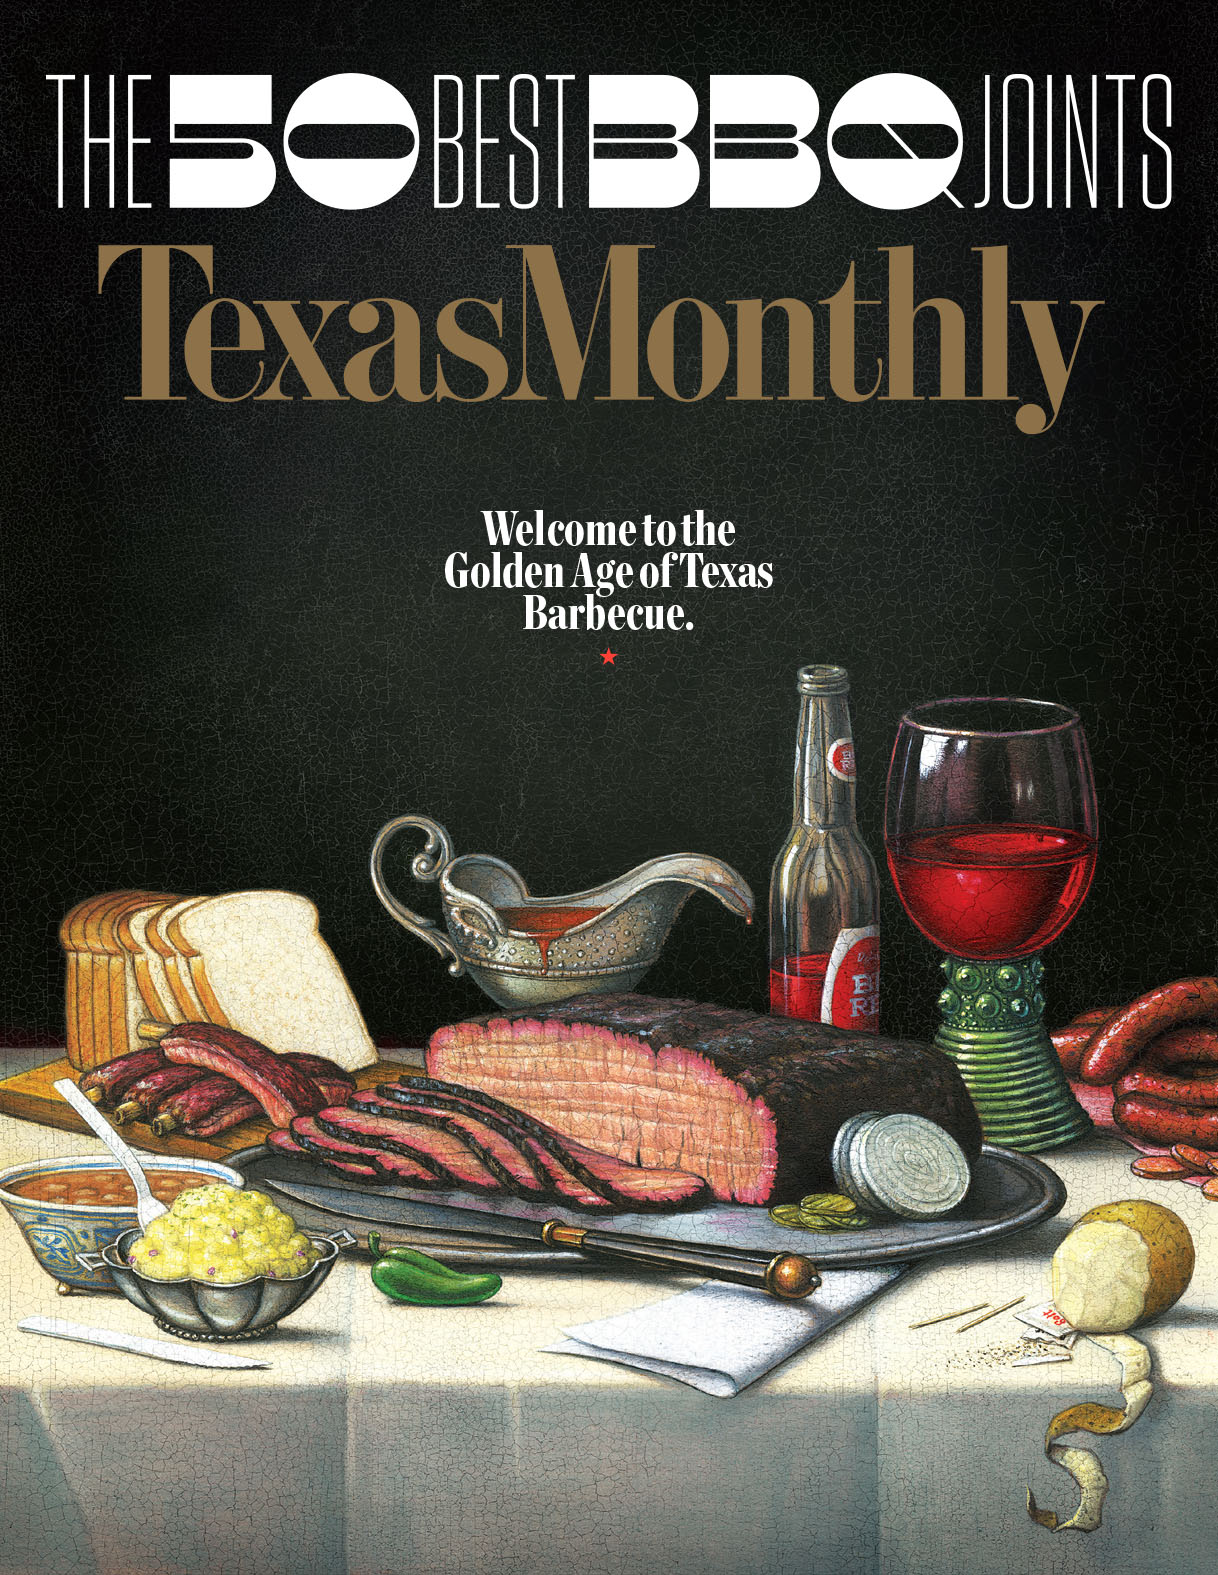 Texas Monthly - “The 50 Best BBQ Joints,” June 2017